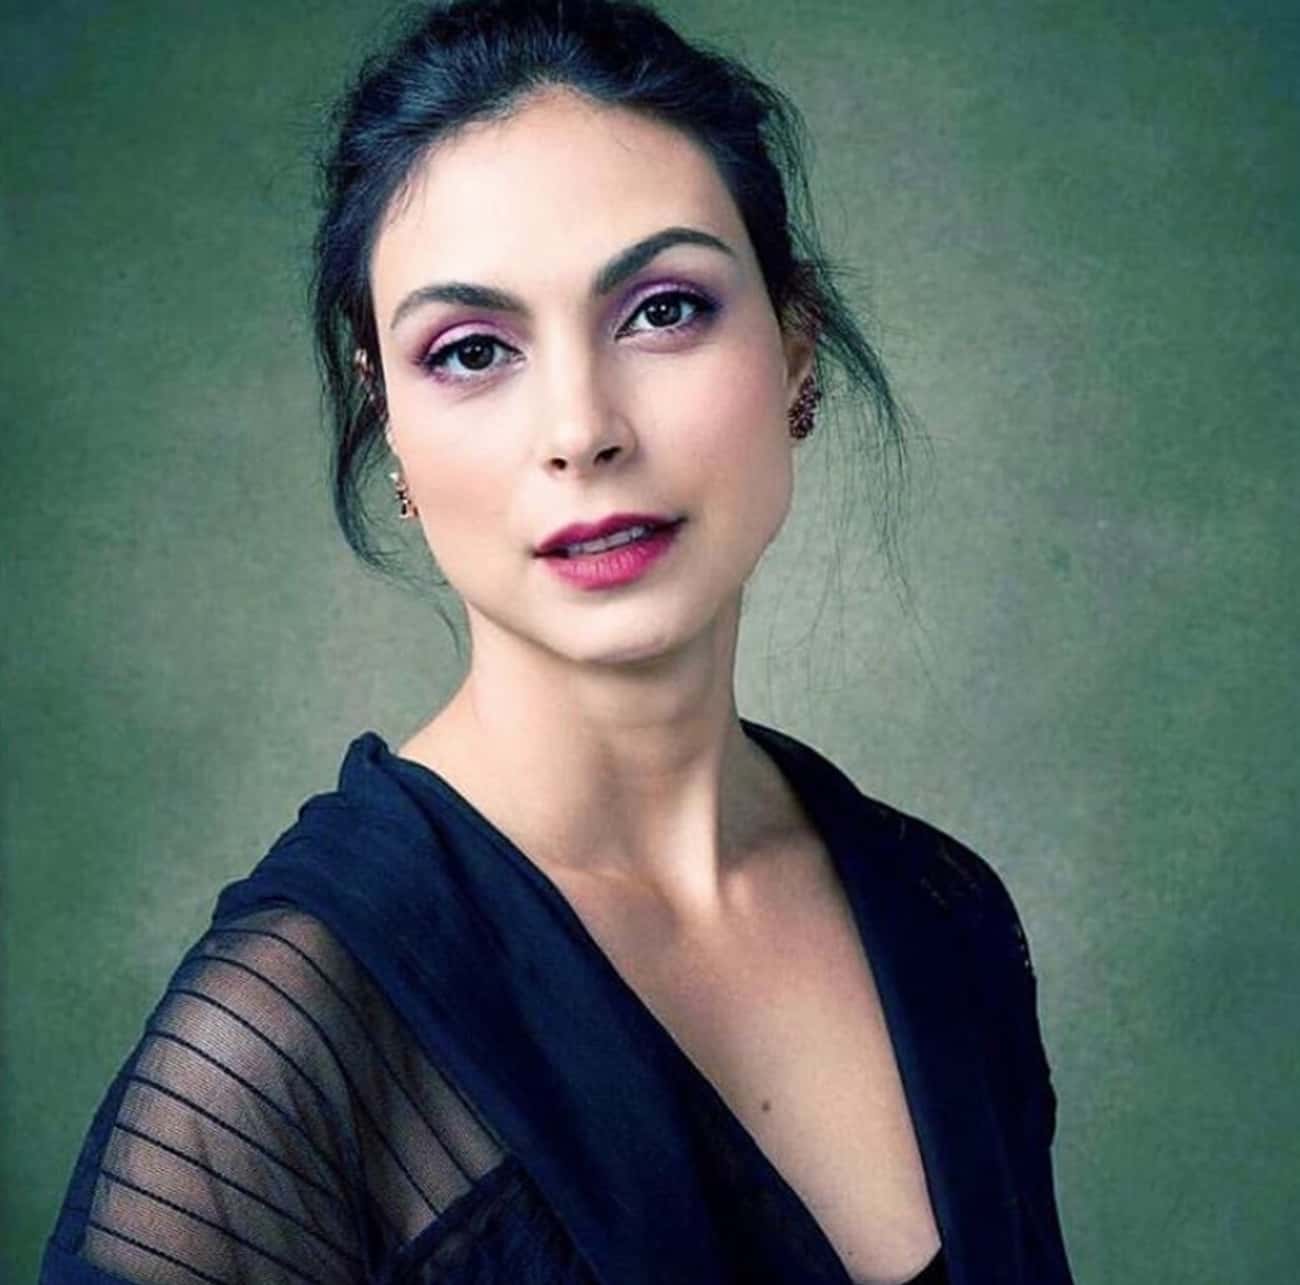 Who Has Morena Baccarin Dated? | Her Dating History with Photos